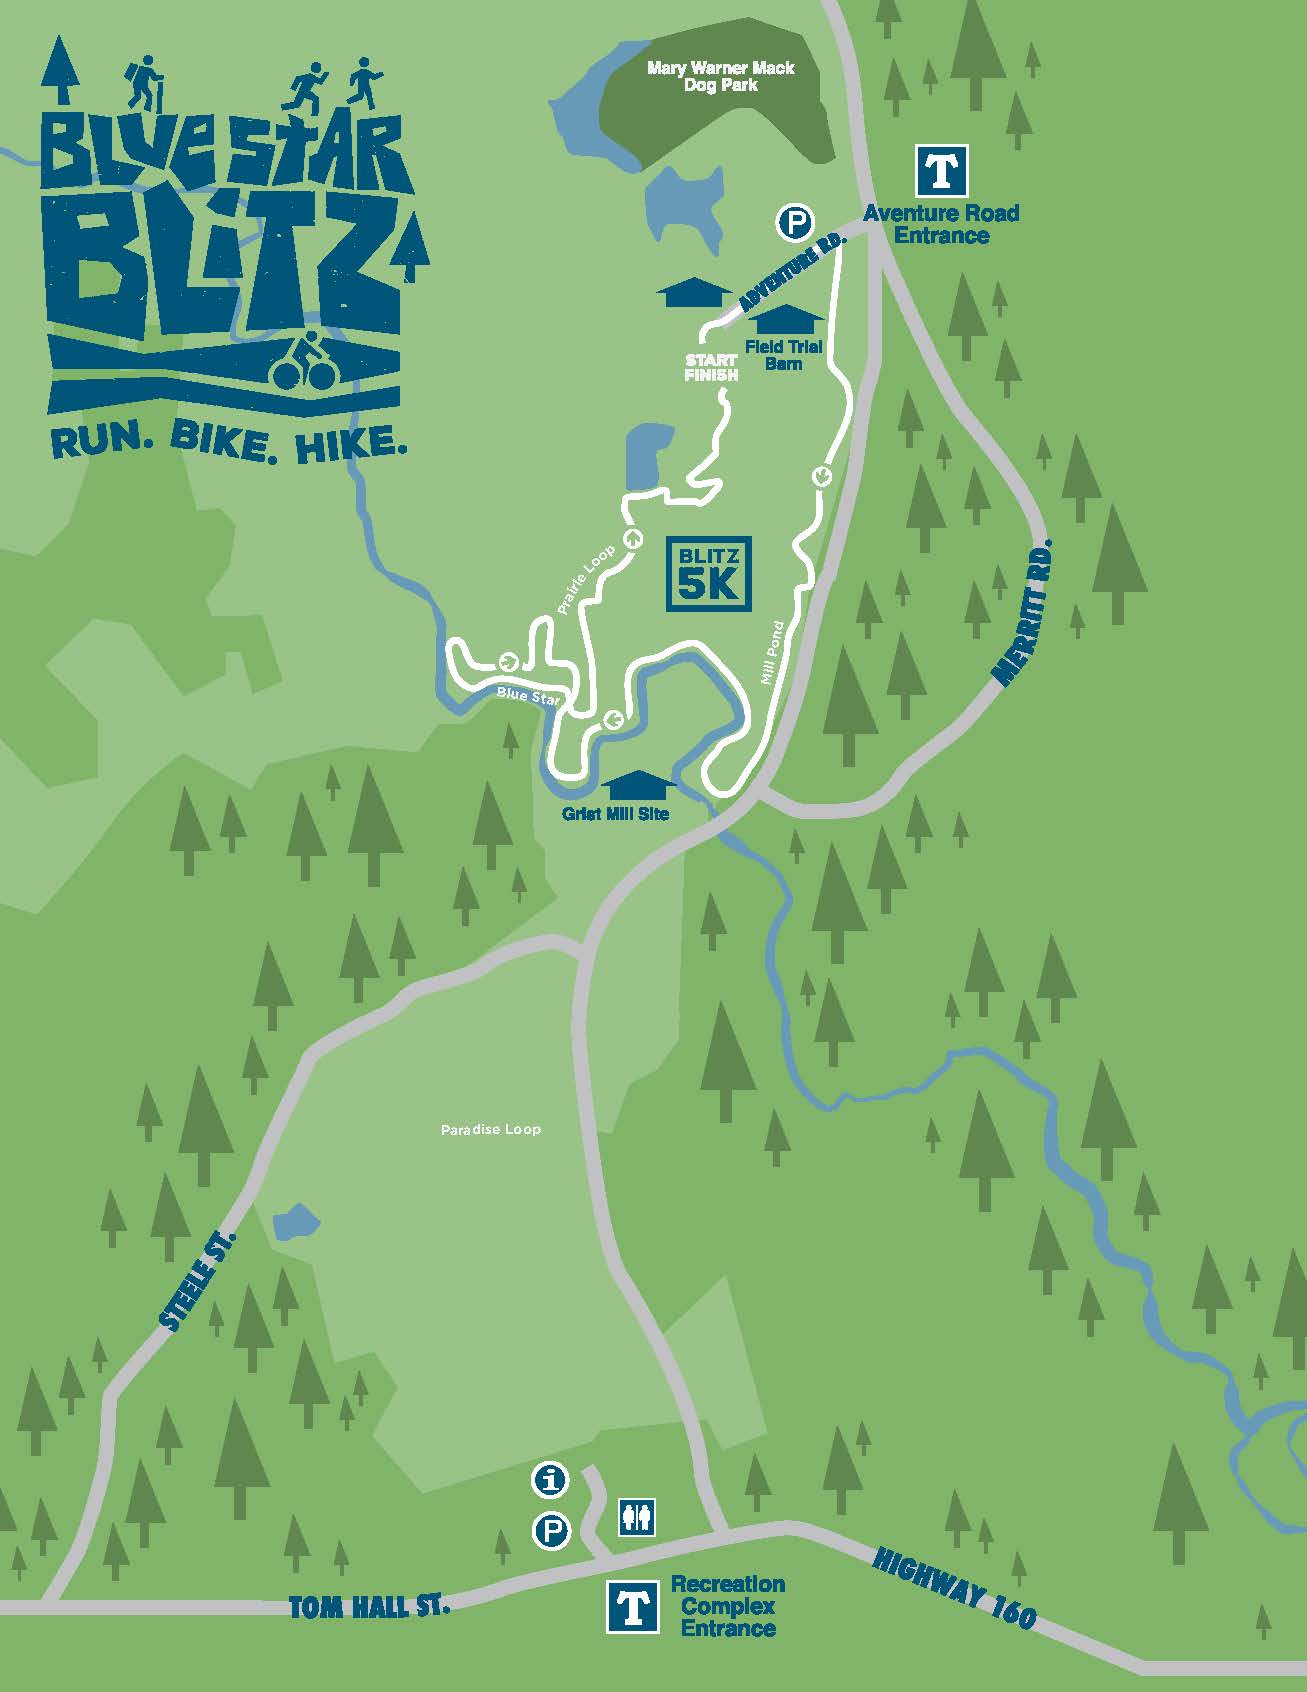 alt=Map of the Blue Star Blitz 5K at the Anne Springs Close Greenway